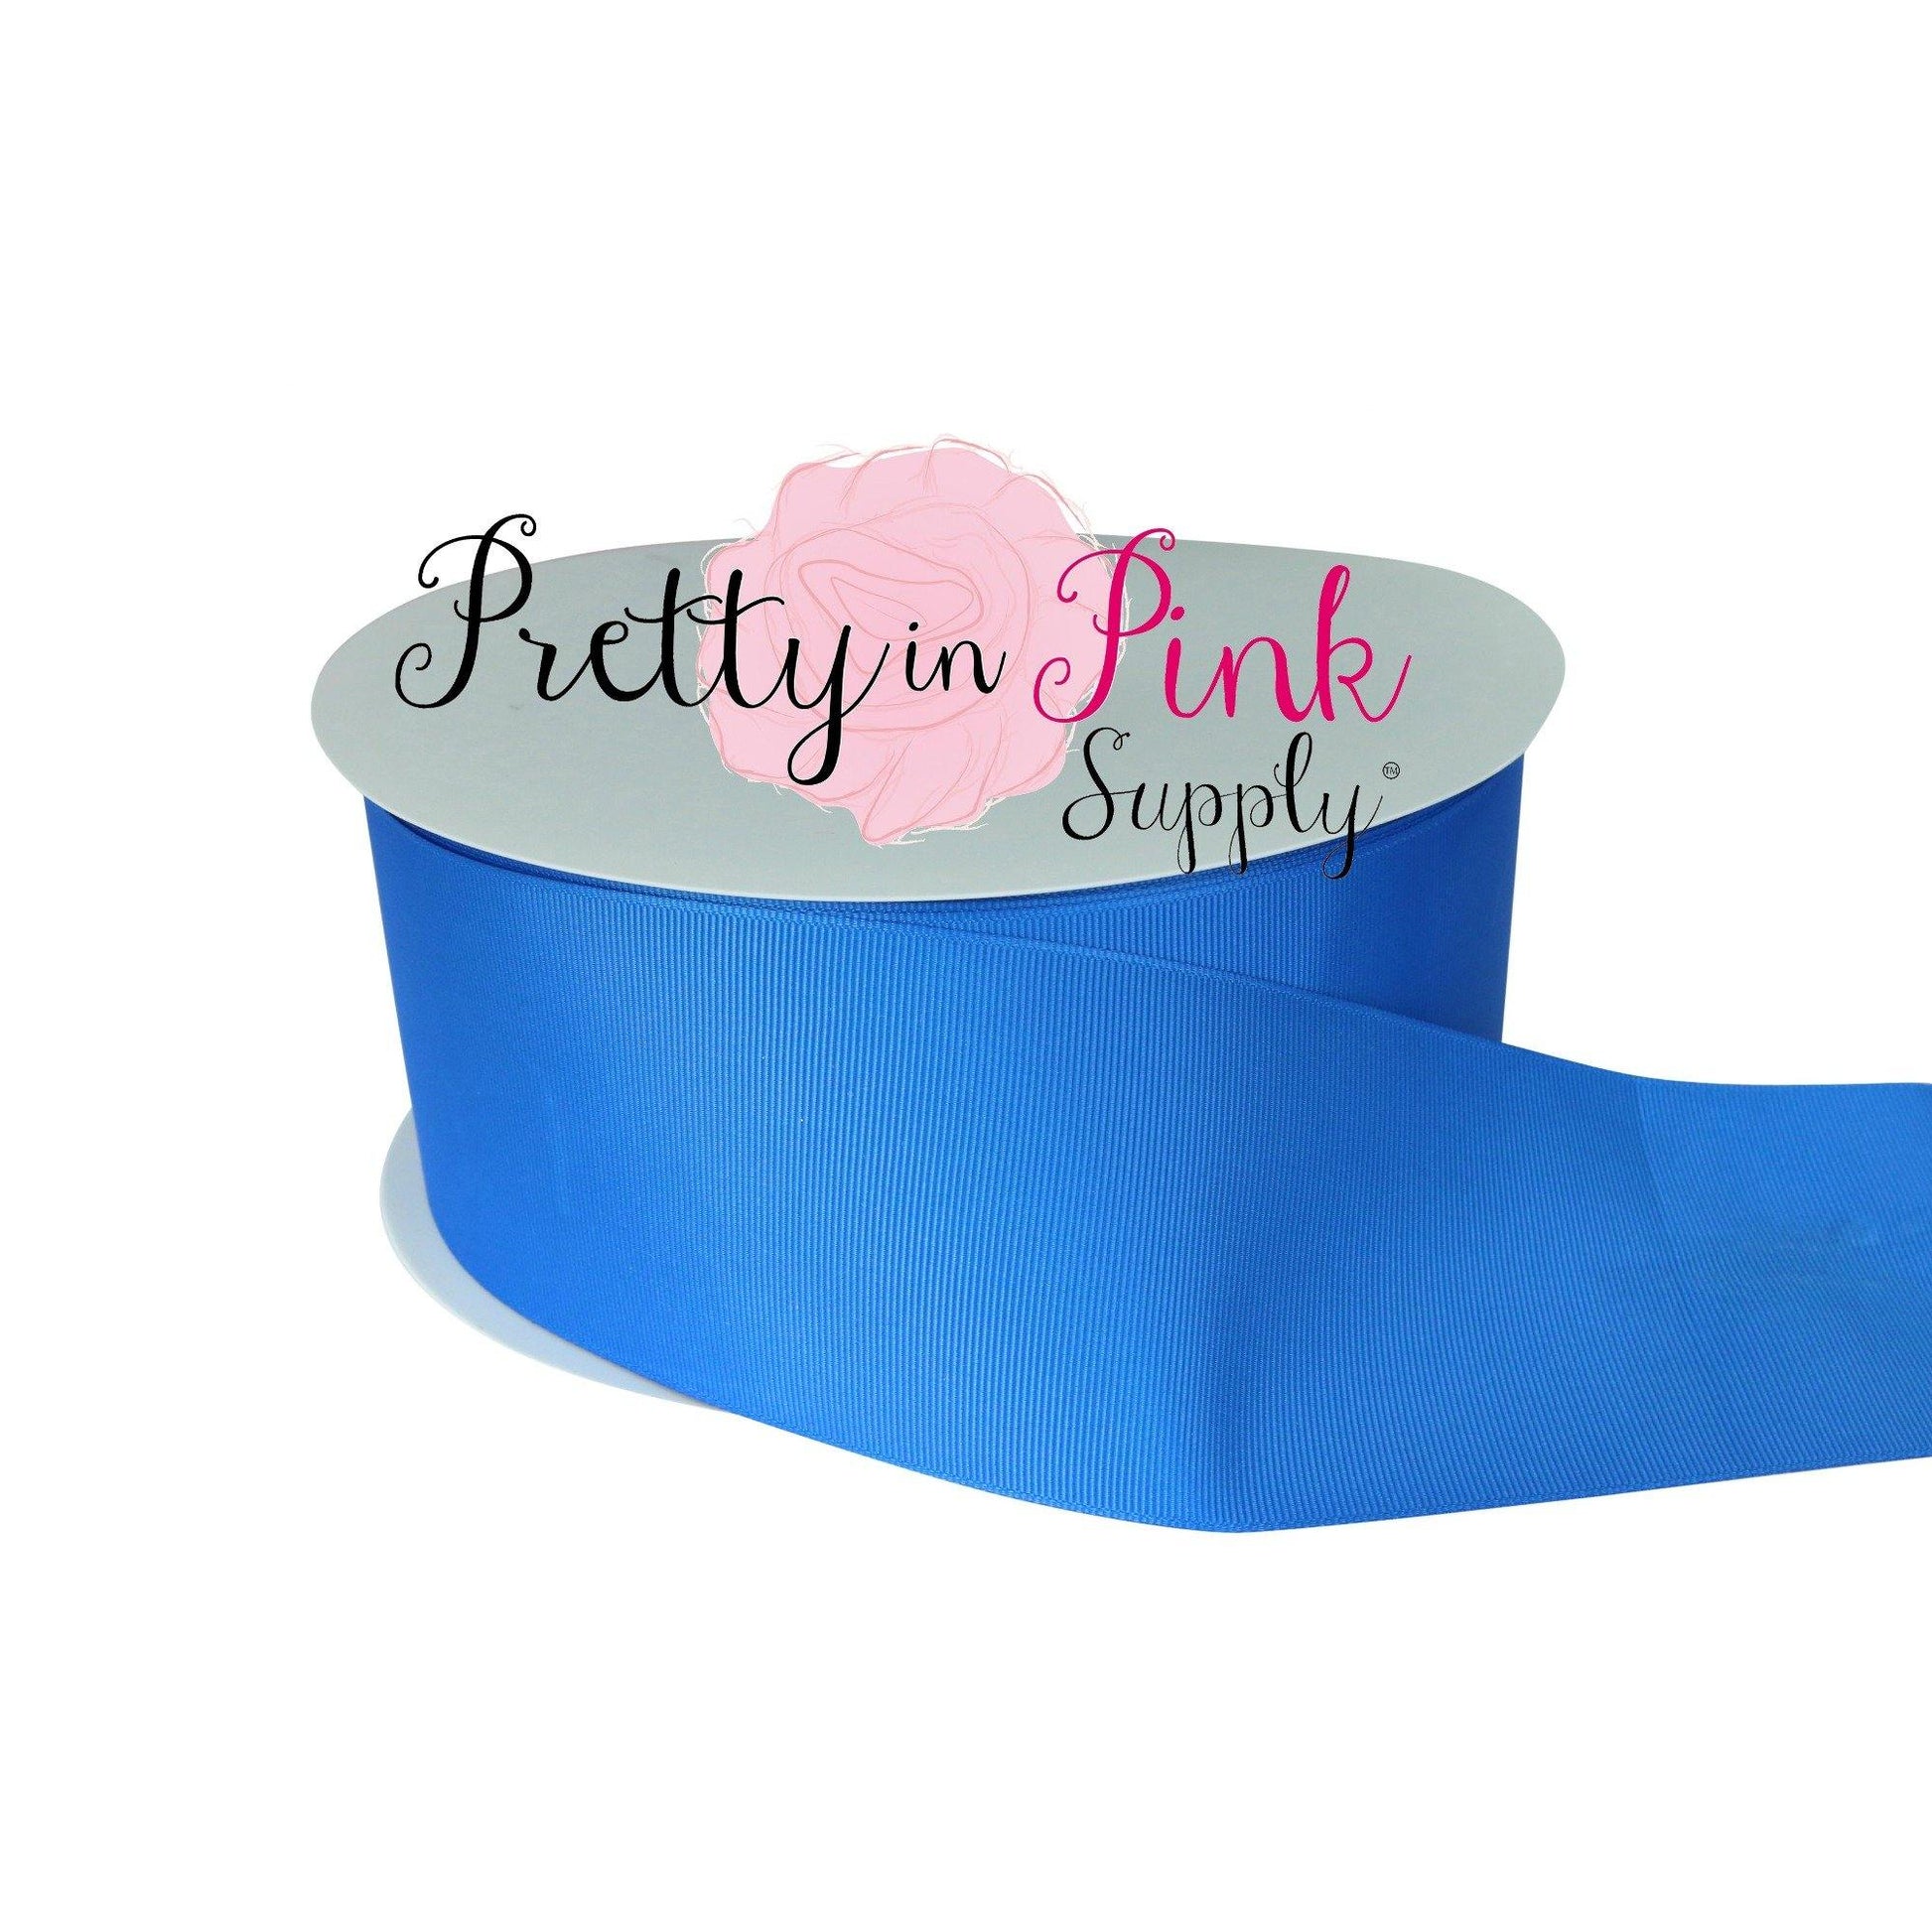 3" SOLID Royal Grosgrain RIBBON - Pretty in Pink Supply